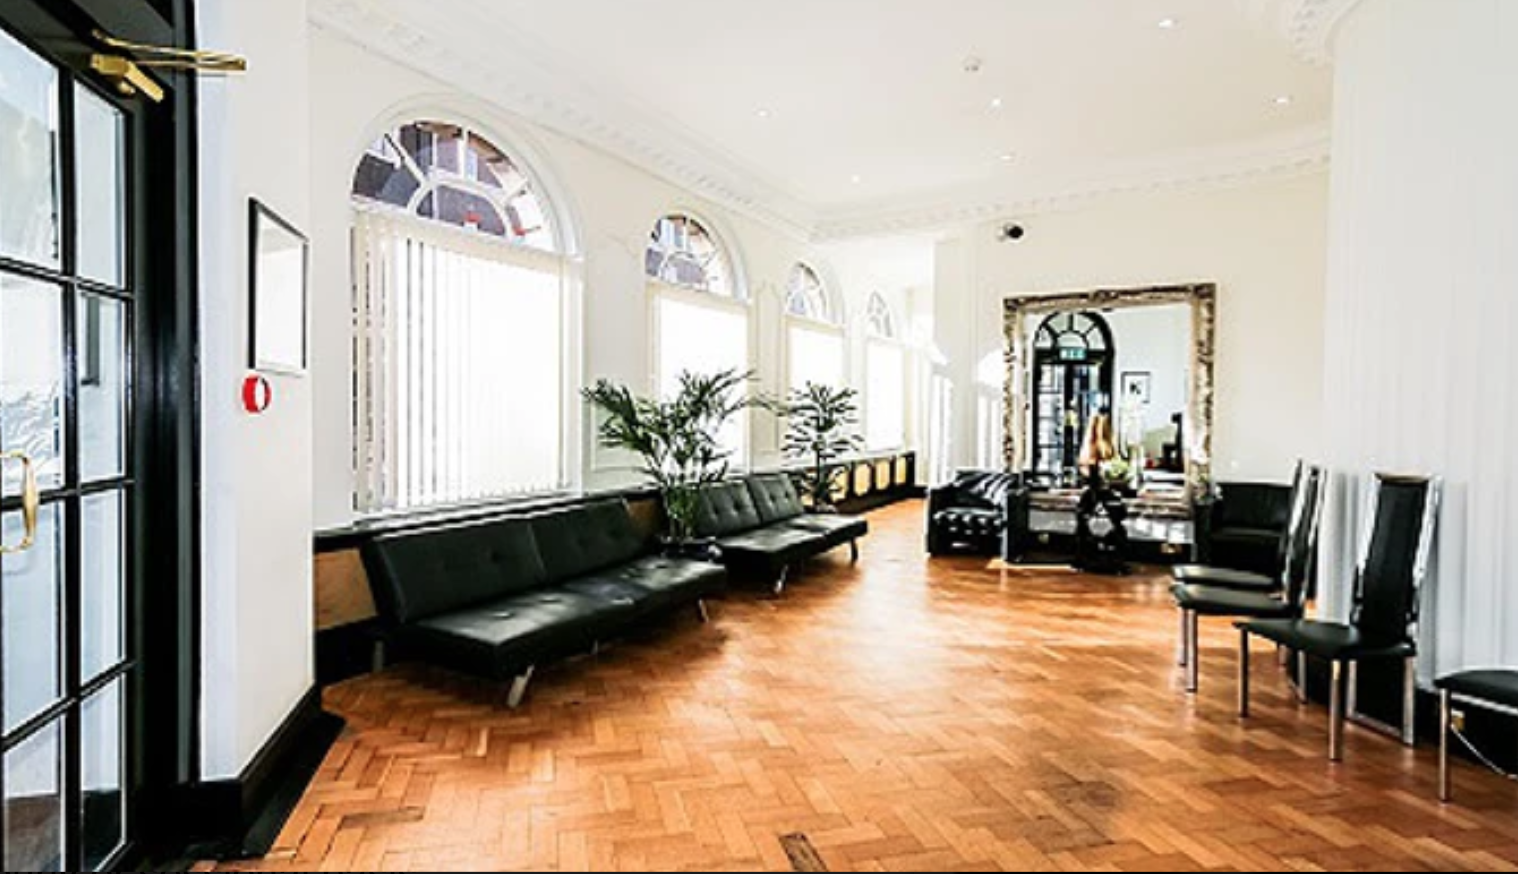 Interior of First Base - Harley Street